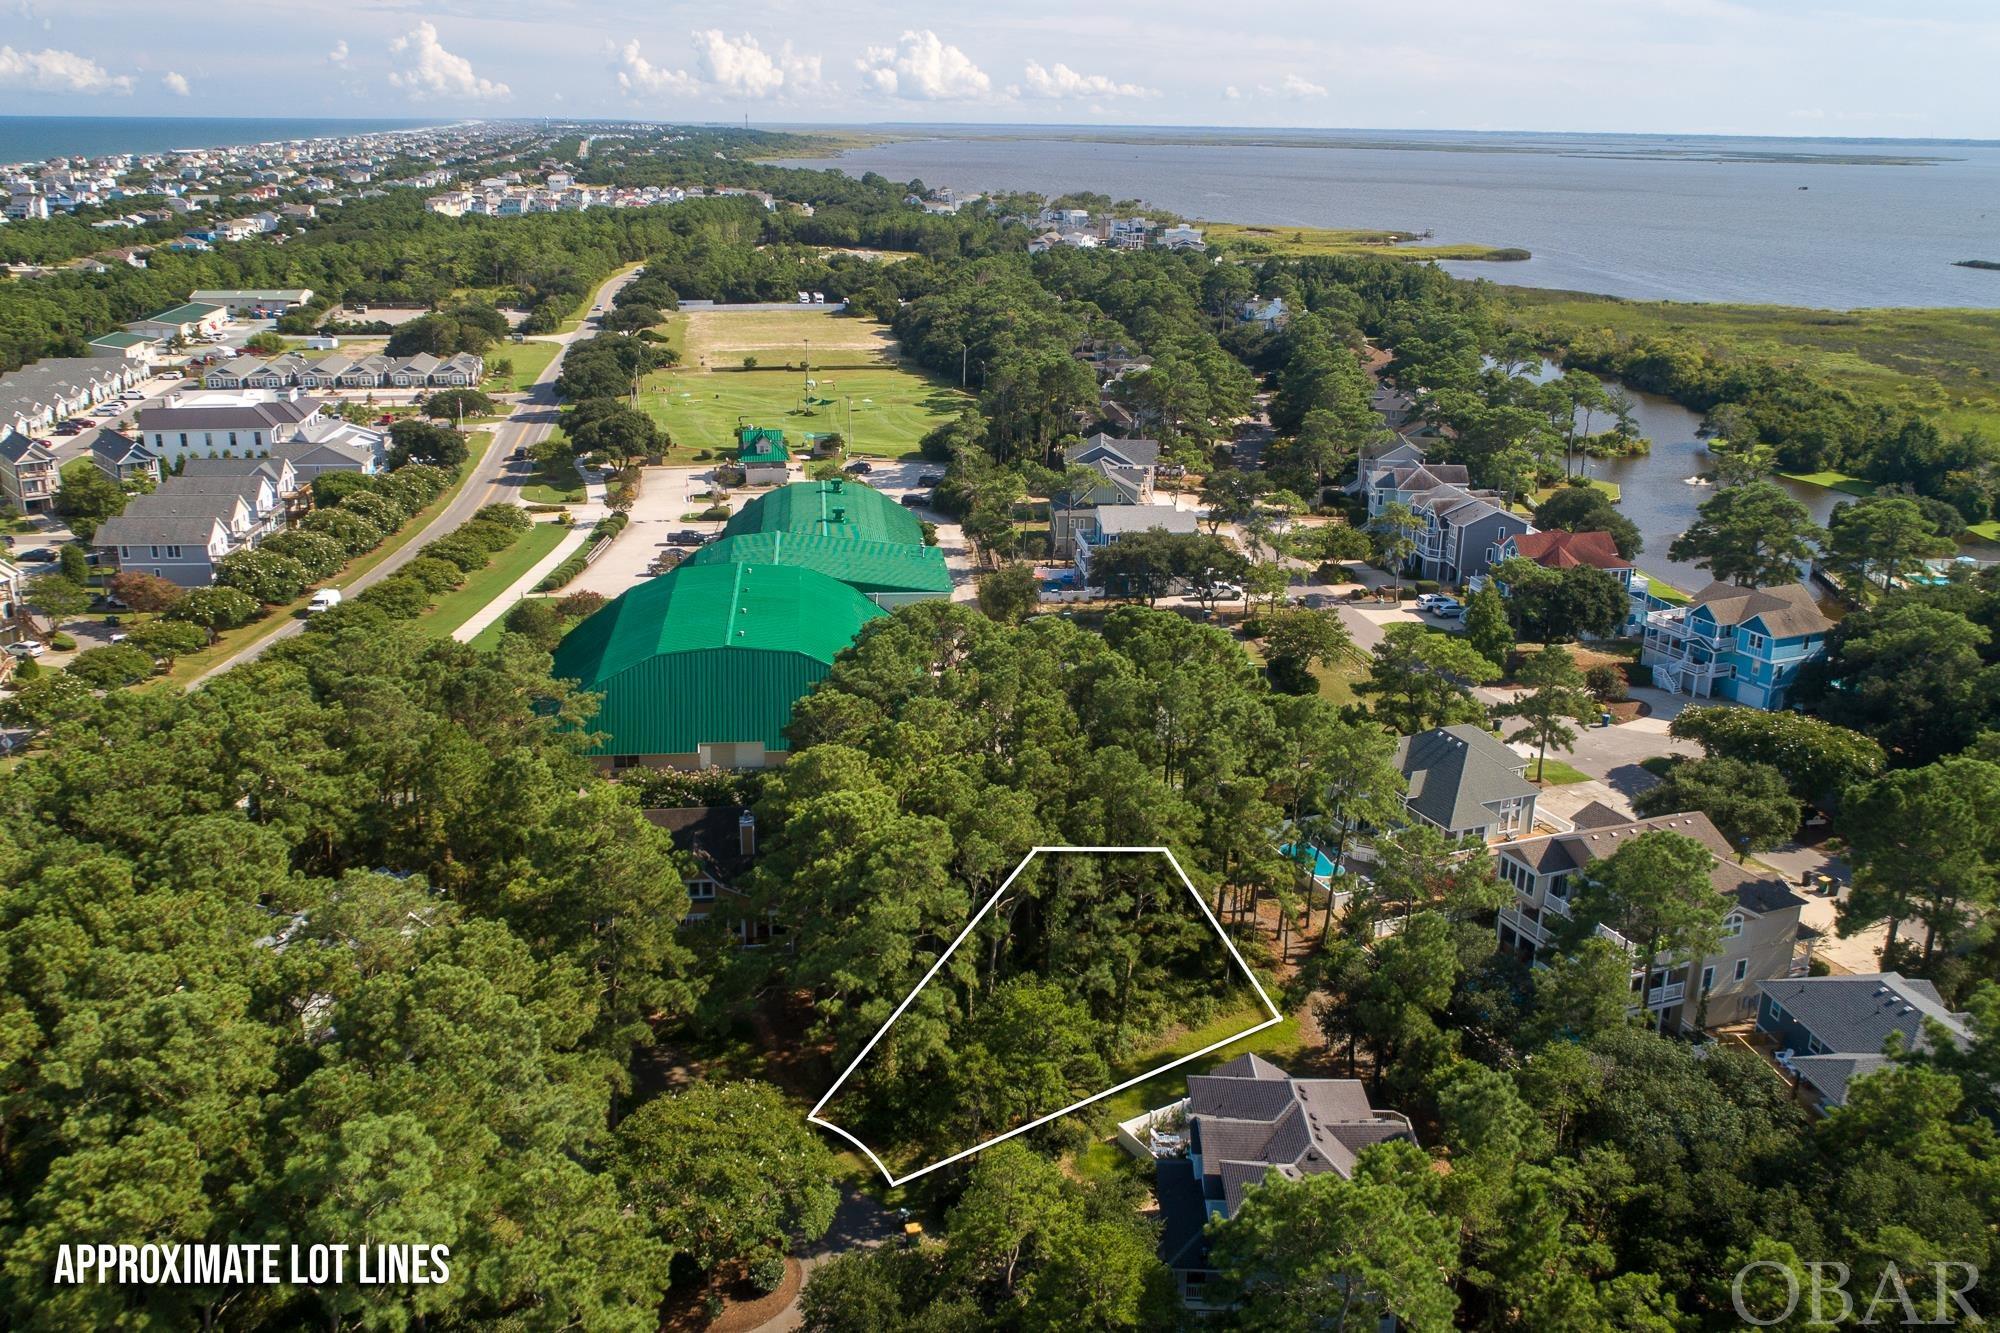 Excellent opportunity to build your dream home on this awesome lot in the award winning Corolla Light Resort! Located on a cul-de-sac close to the Indoor Sports Facility, this is a great lot for you to build the home you always wanted. Room for a pool!. X Flood Zone! Breeze over to the Corolla Light Sound side pool, walk the nature trails and enjoy the peaceful Currituck Sound. Corolla Light's amenities are 2nd to none, with 3 Oceanfront pools, Sound Side pool, 2 indoor and 8 outdoor tennis courts, Sports Center with competition size pool, exercise equipment, racquetball court and more!  A short walk to the Corolla Light Shops including restaurants and miniature golf course.